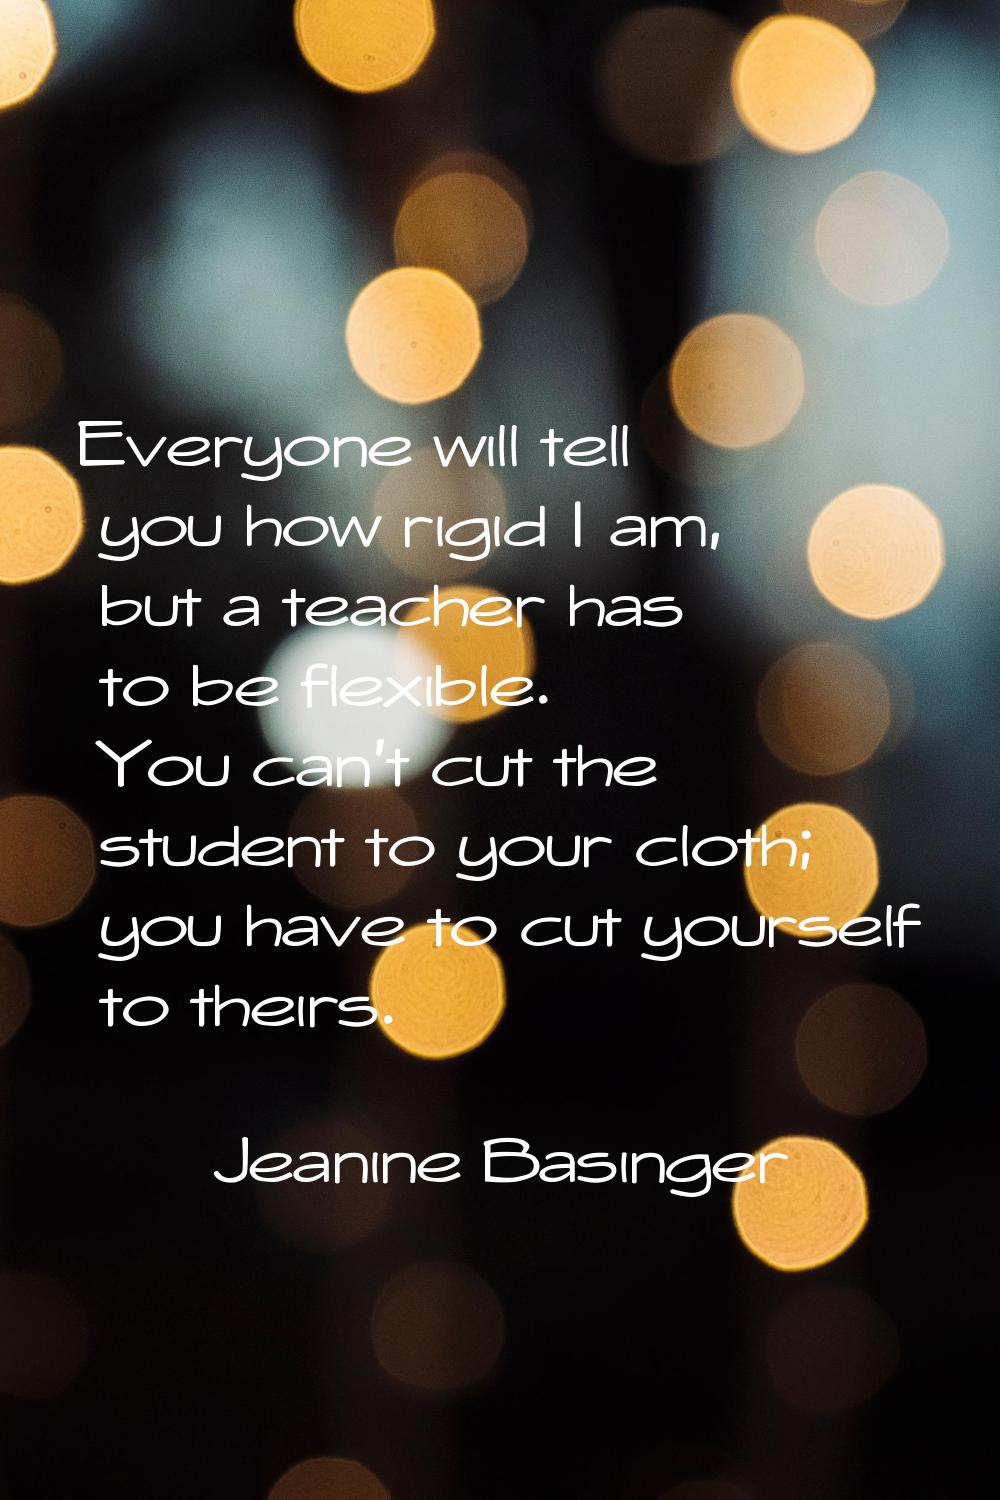 Everyone will tell you how rigid I am, but a teacher has to be flexible. You can't cut the student 